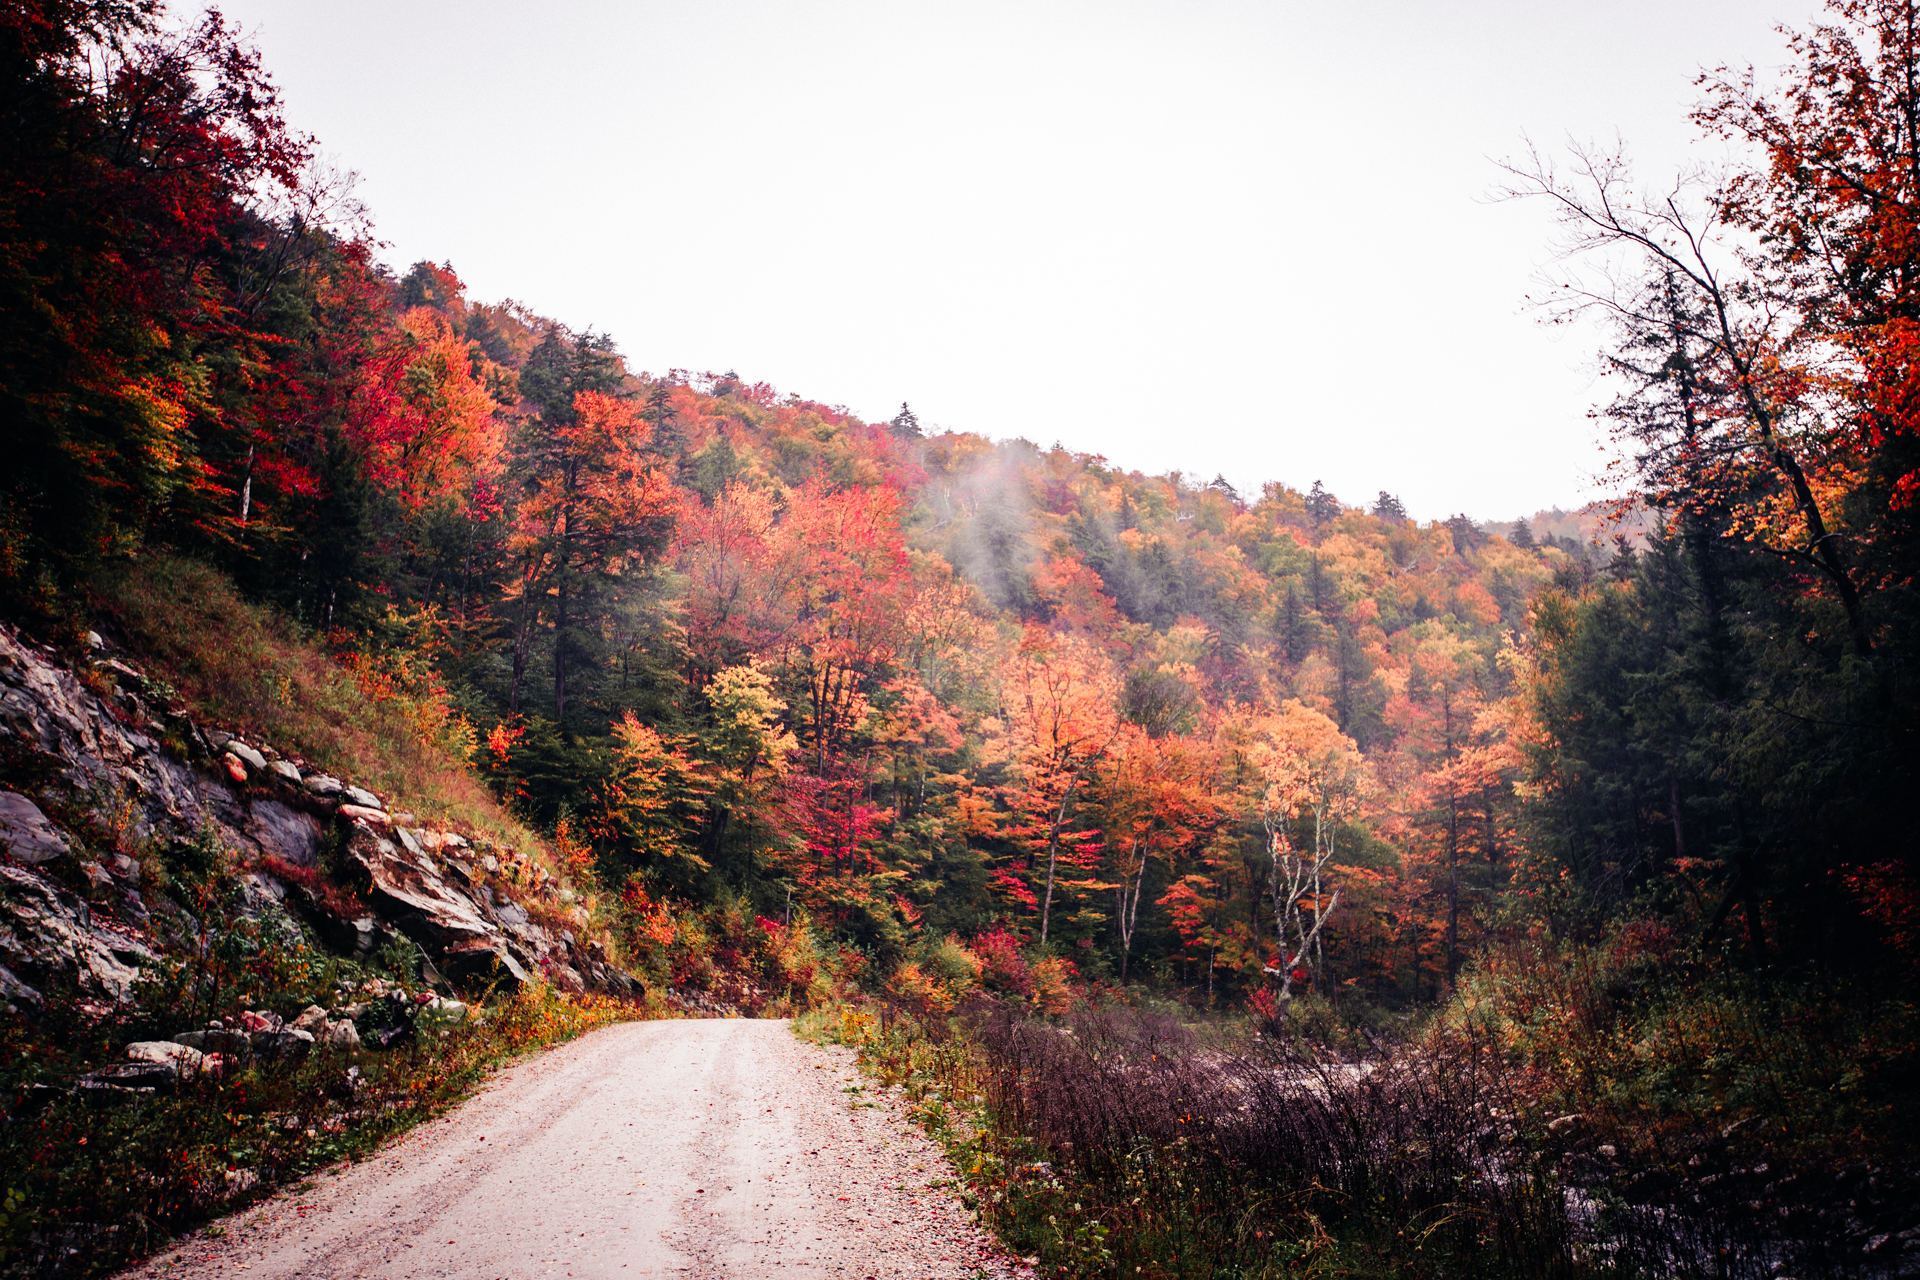 Top 5 Scenic Drives in Vermont This Fall by top us travel blogger, Shannon Shipman